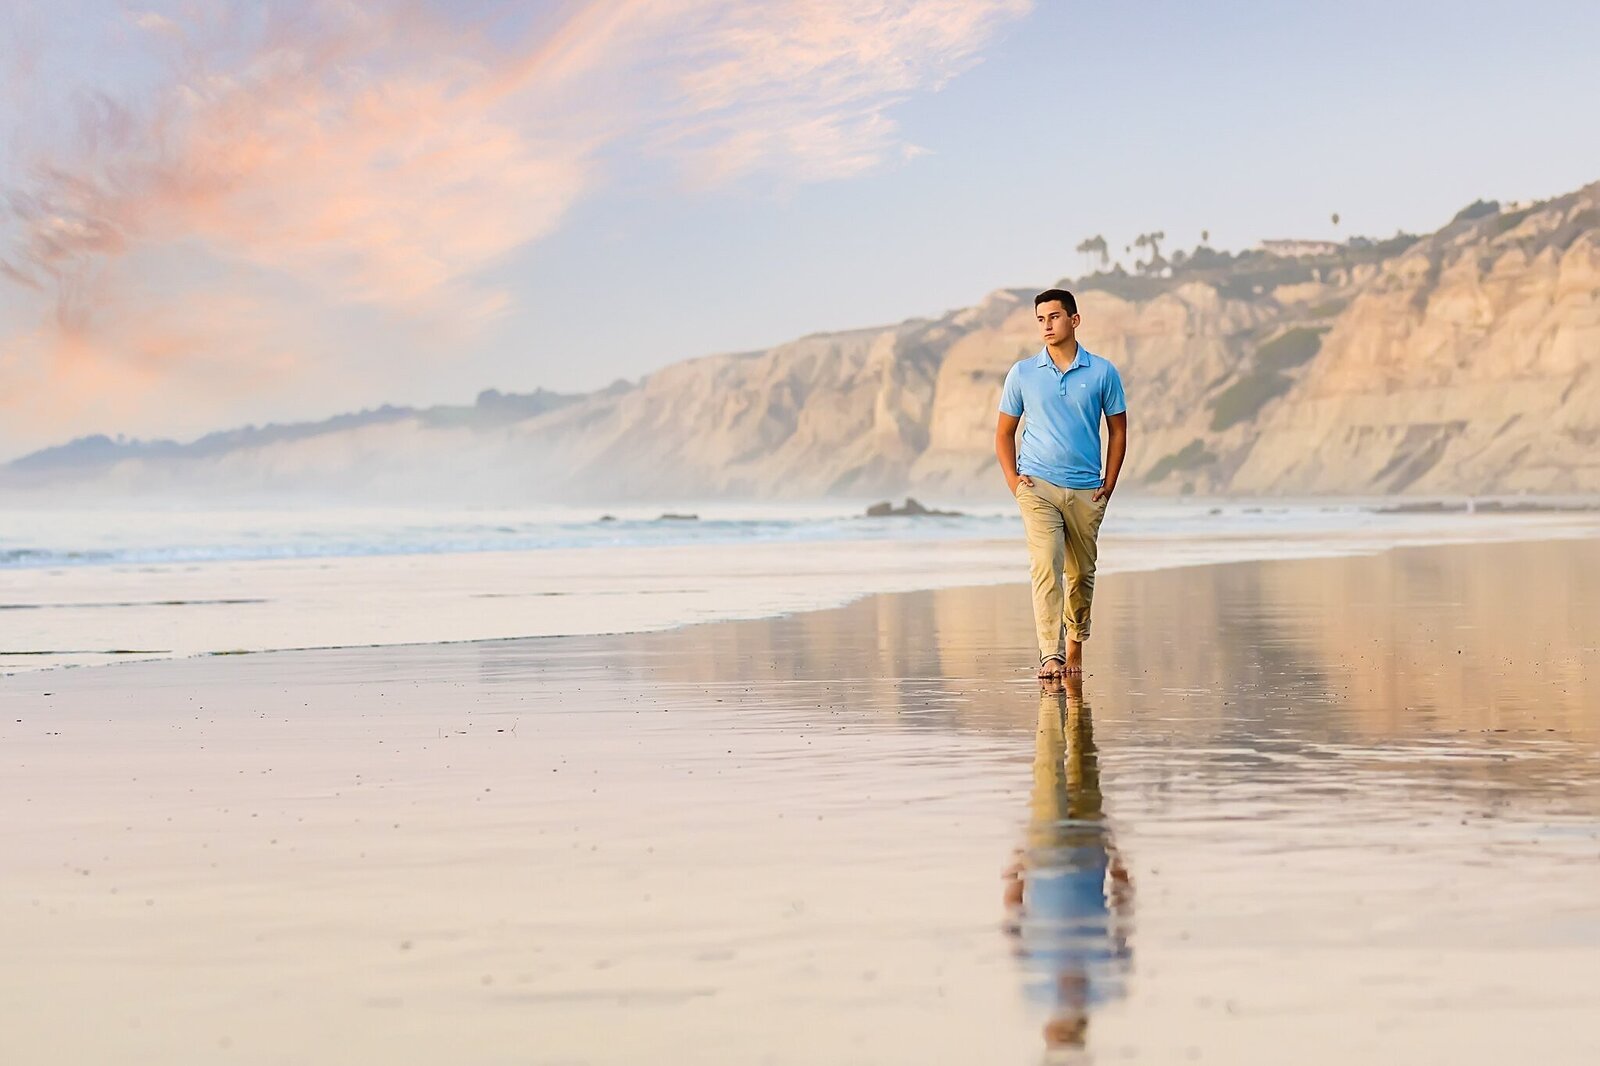 Senior boy walking along the beach in La Jolla with reflection showing on the wet sand